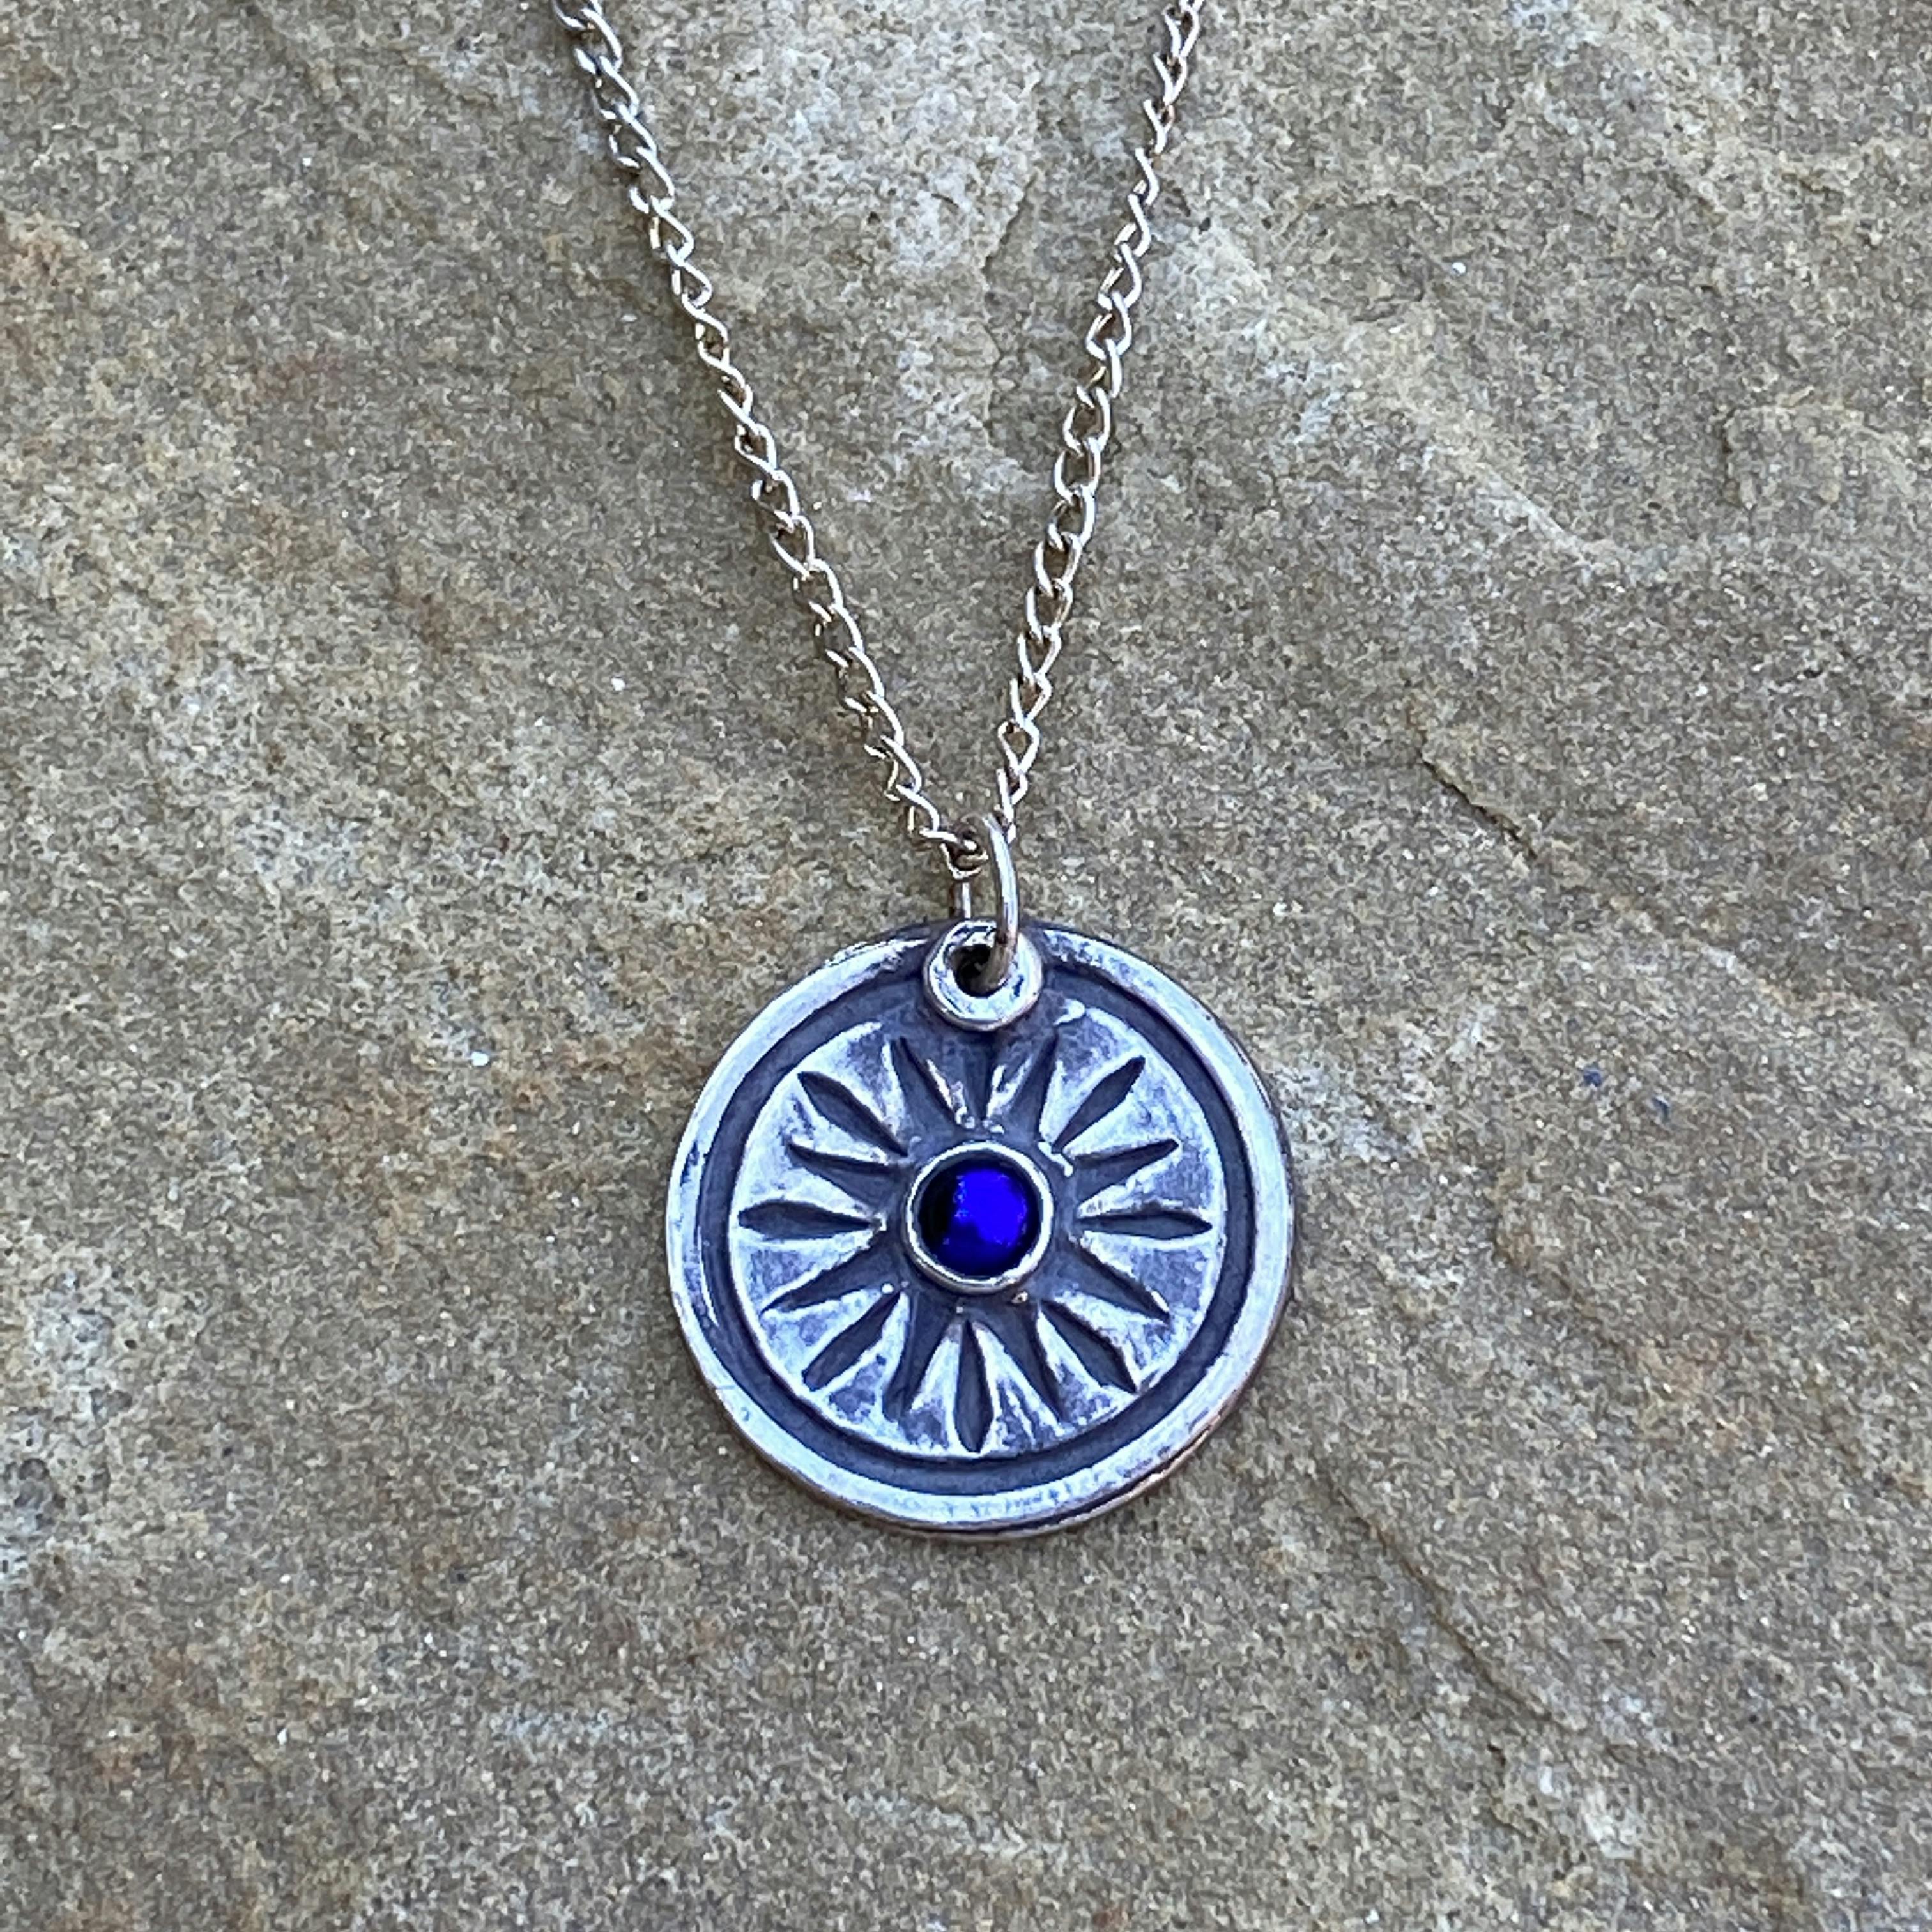 Fine Silver Rustic Pendant with Blue Crystal Gem